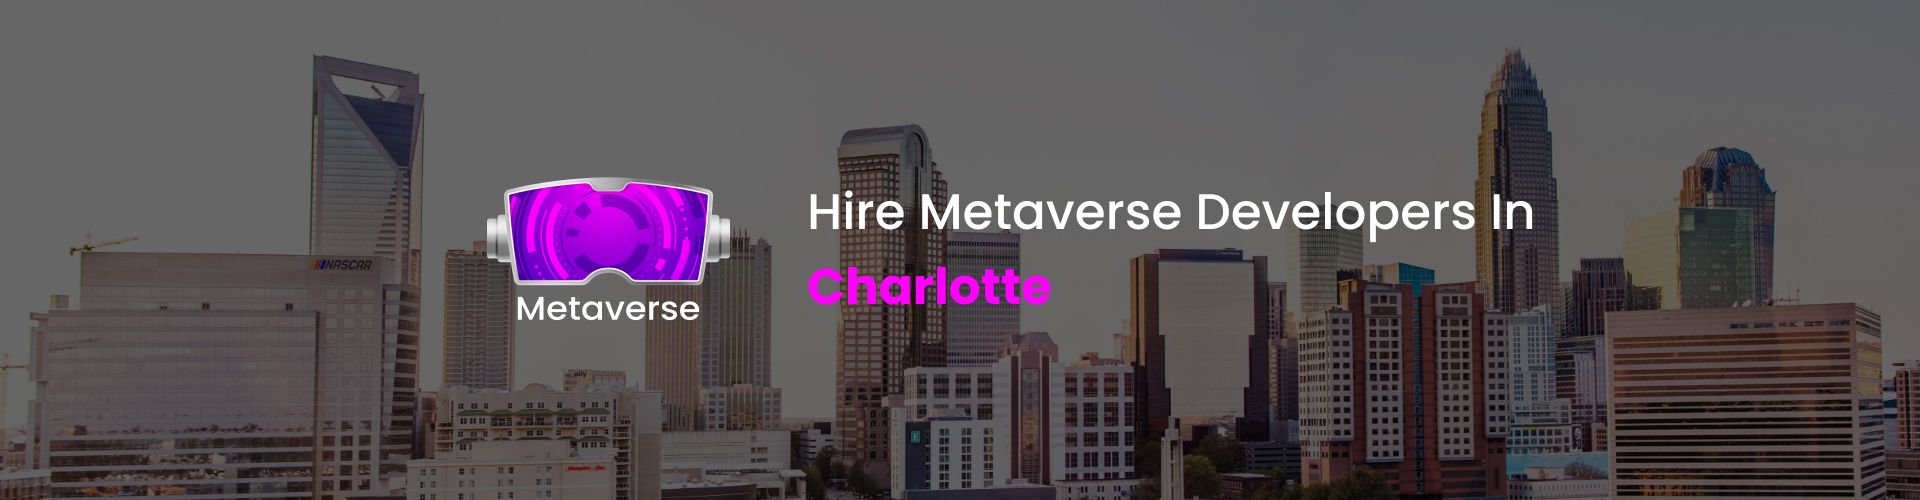 metaverse developers in charlotte